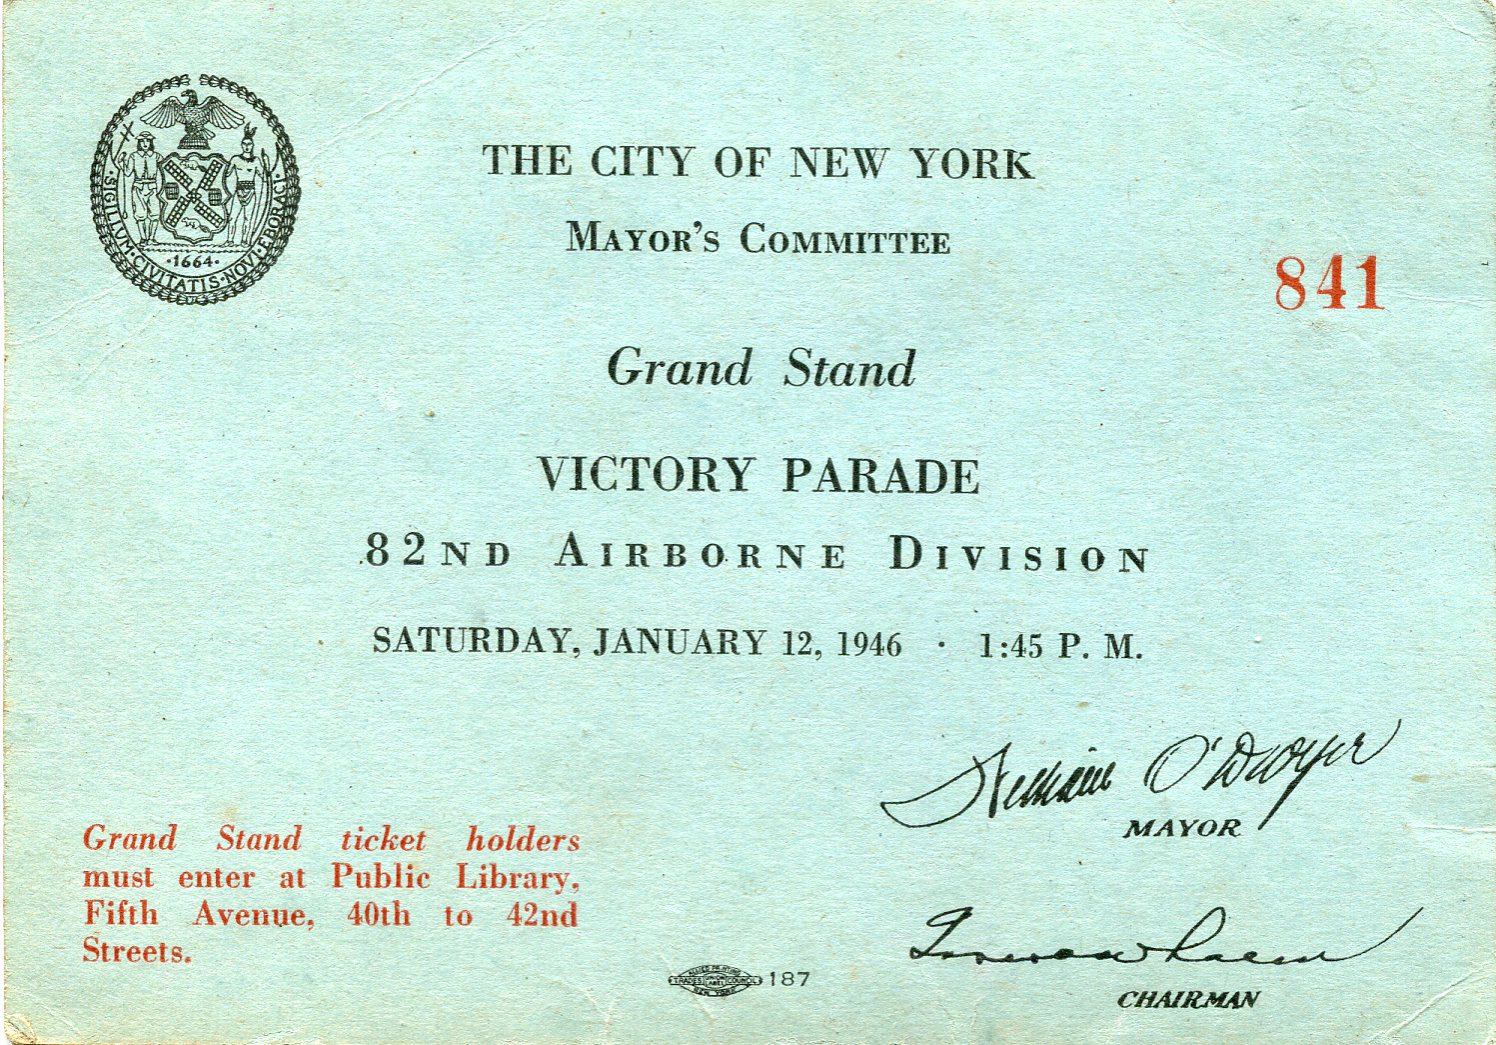 Grand Stand Pass for the New York City 5th Avenue 82nd Airborne Division Victory Parade